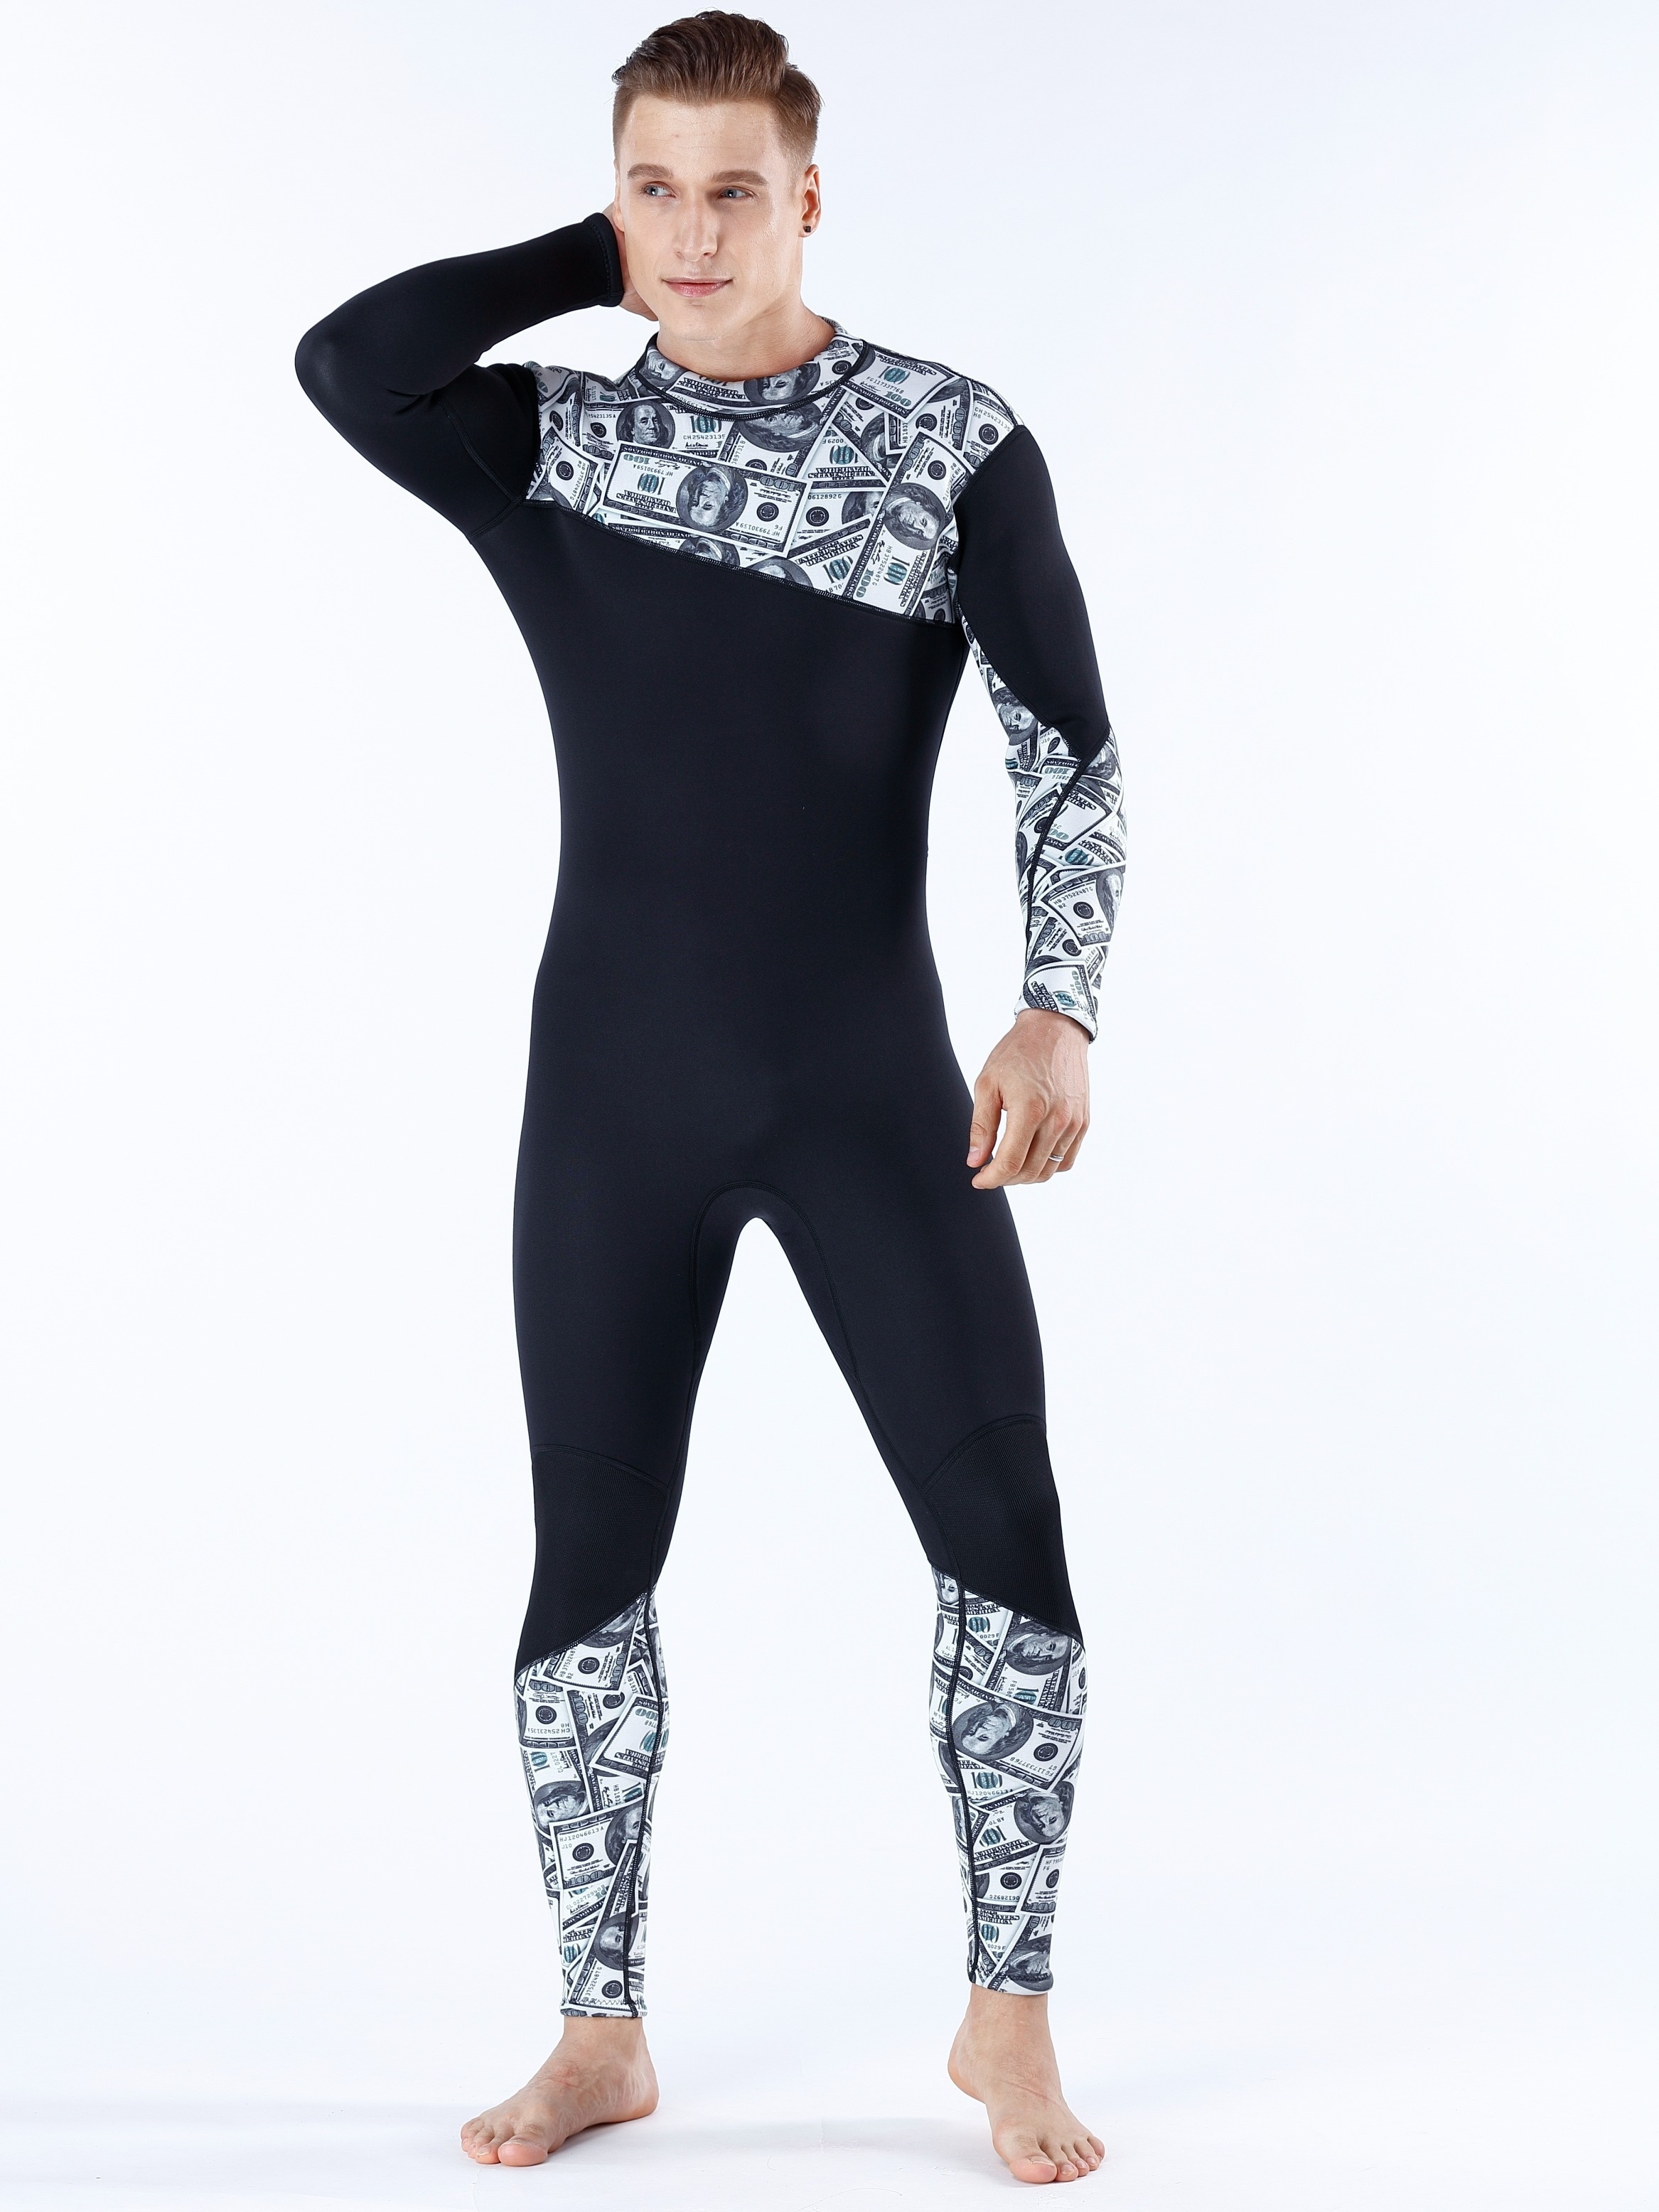  3MM Neoprene Spearfishing Wetsuit with Hooded, 2 Pieces  Camouflage Hunting Diving Suit Color Can Change with The Environment for  Cool Water Freediving Snorkeling,S : Sports & Outdoors